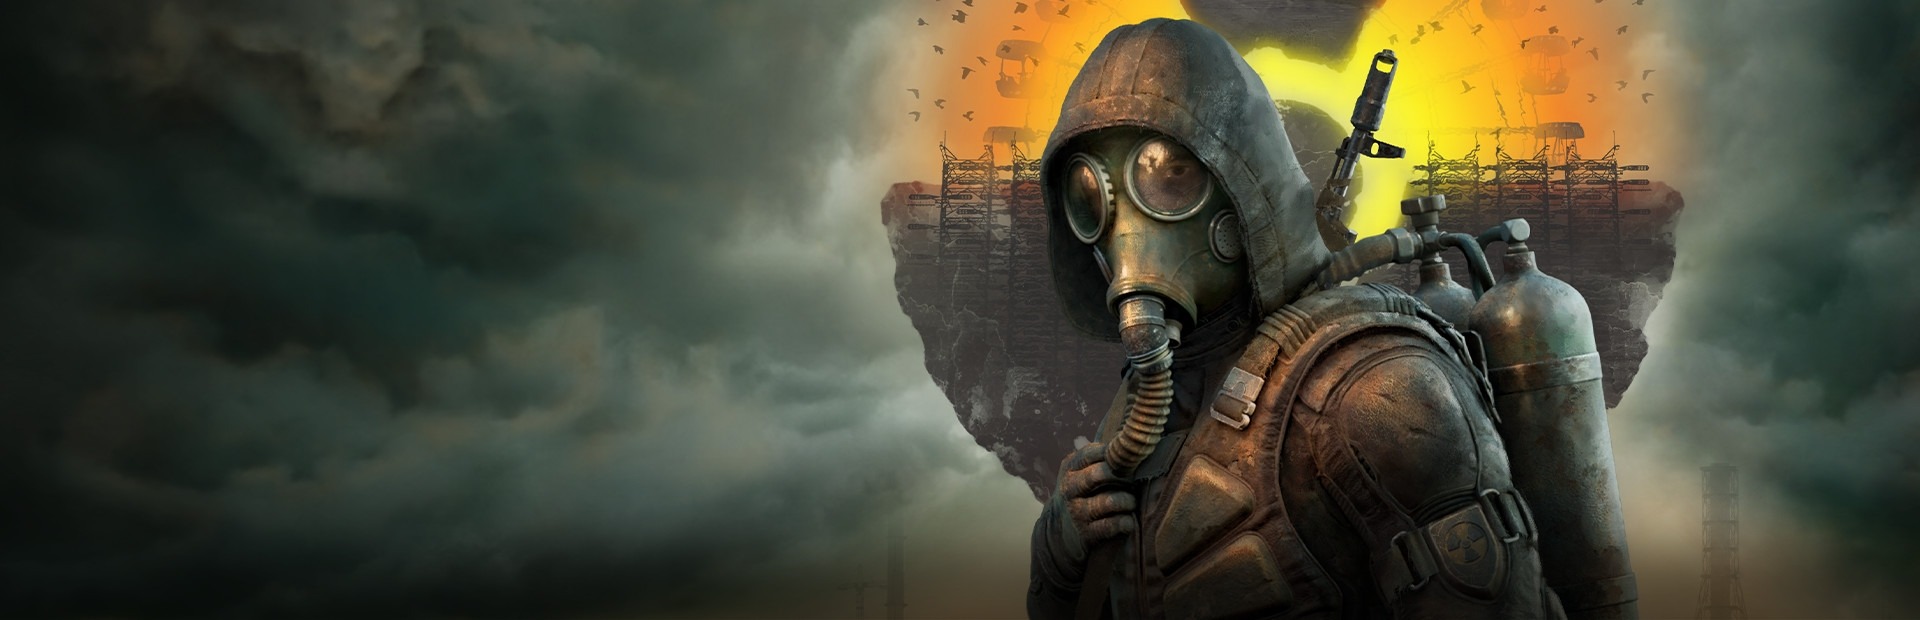 Banner S.T.A.L.K.E.R. 2: Heart of Chornobyl Deluxe Edition